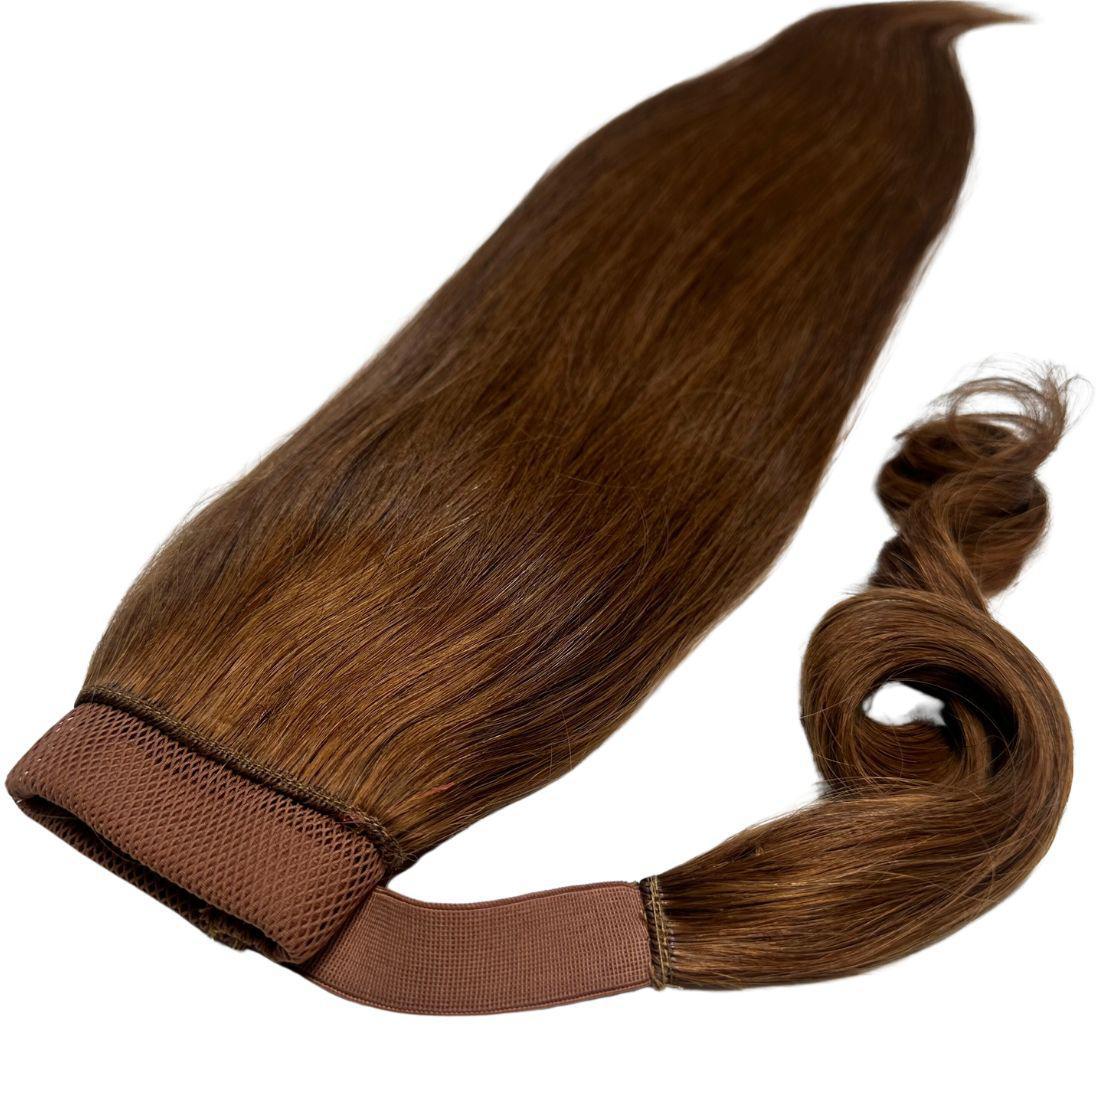 Auburn Ponytail with wrap around hair for a secure fit.